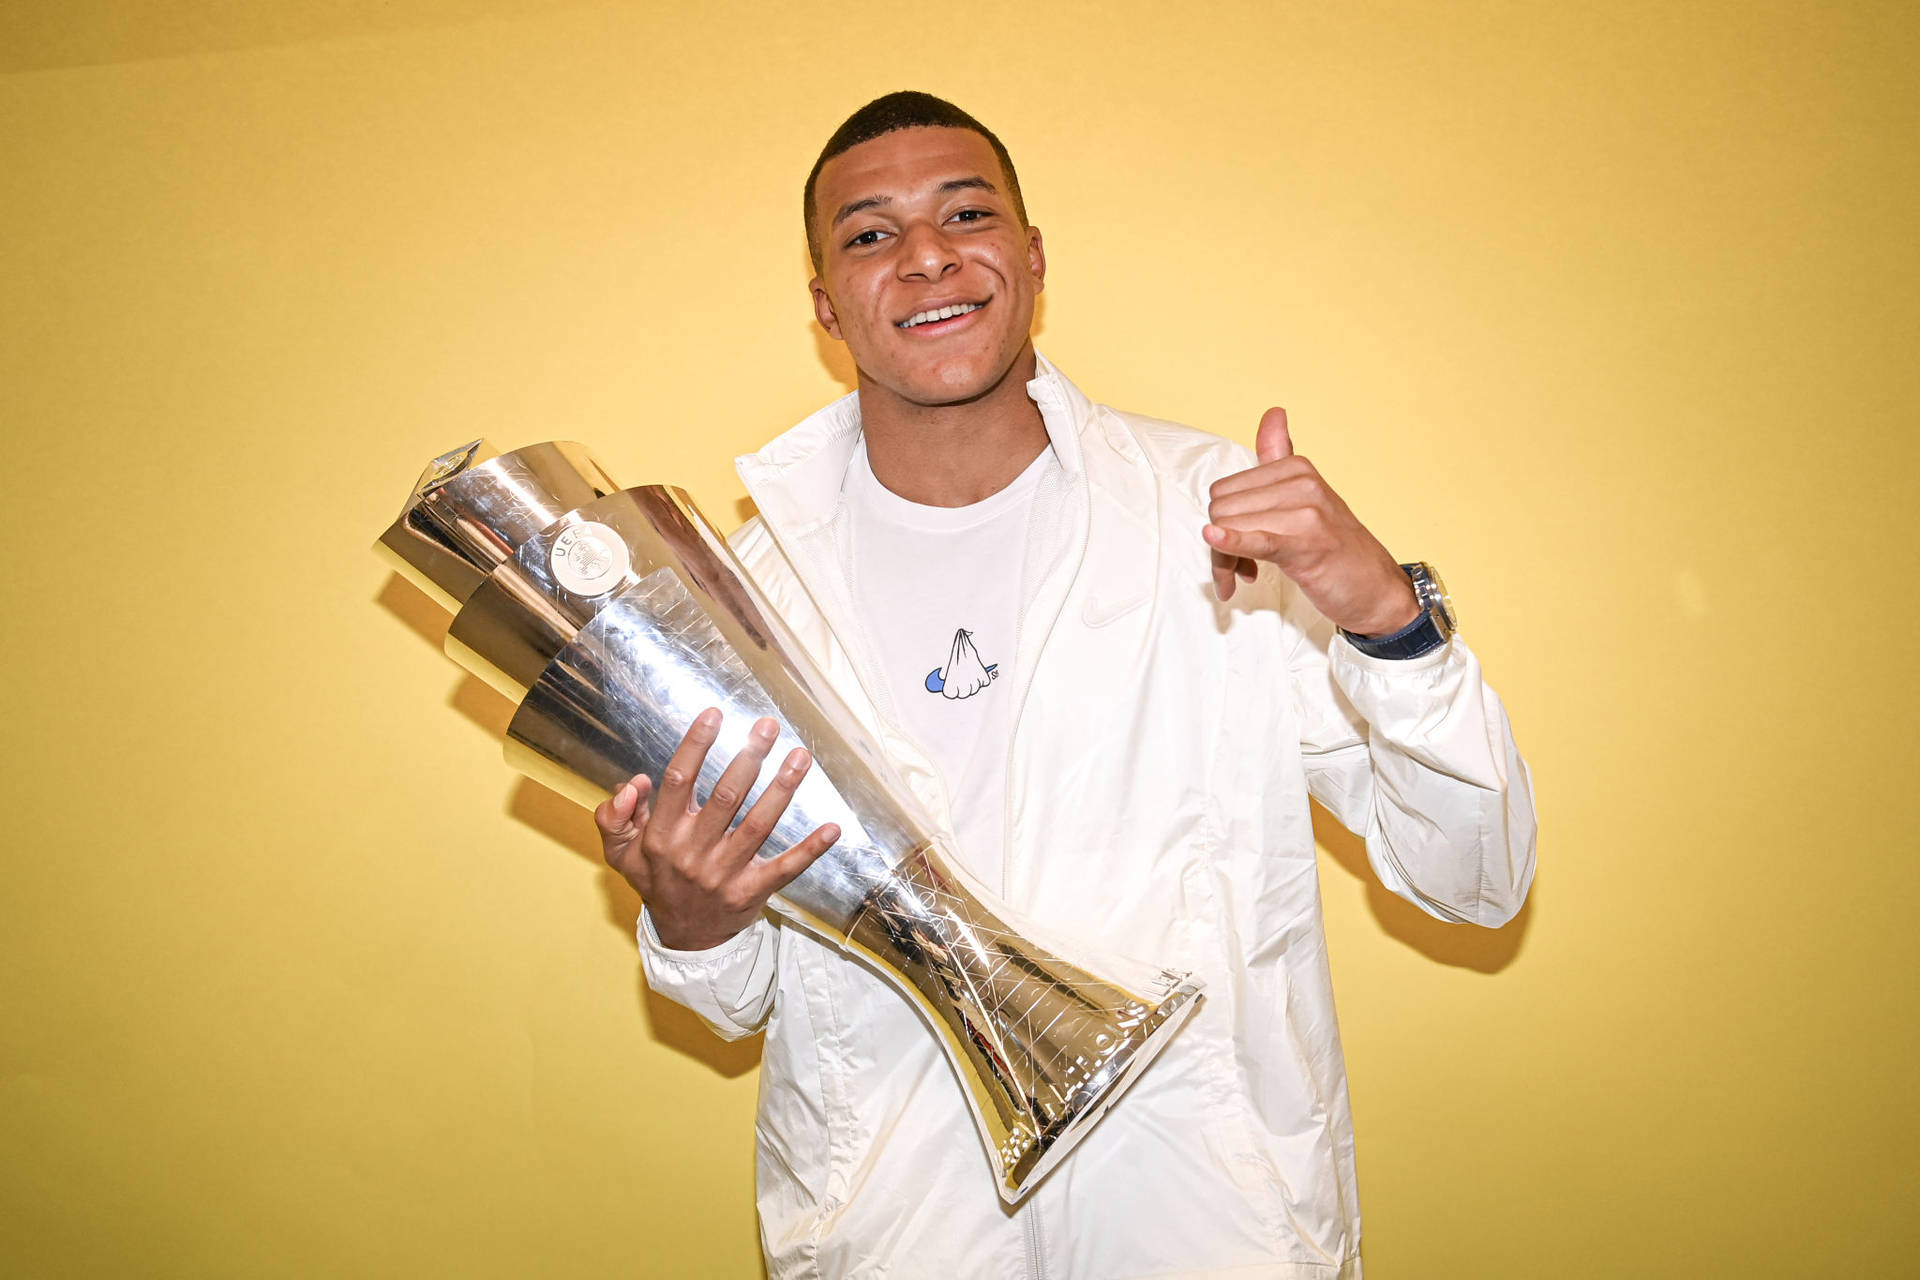 Mbappémed Uefa-trofén (for A Computer Or Mobile Wallpaper Featuring Mbappé With The Uefa Trophy) Wallpaper